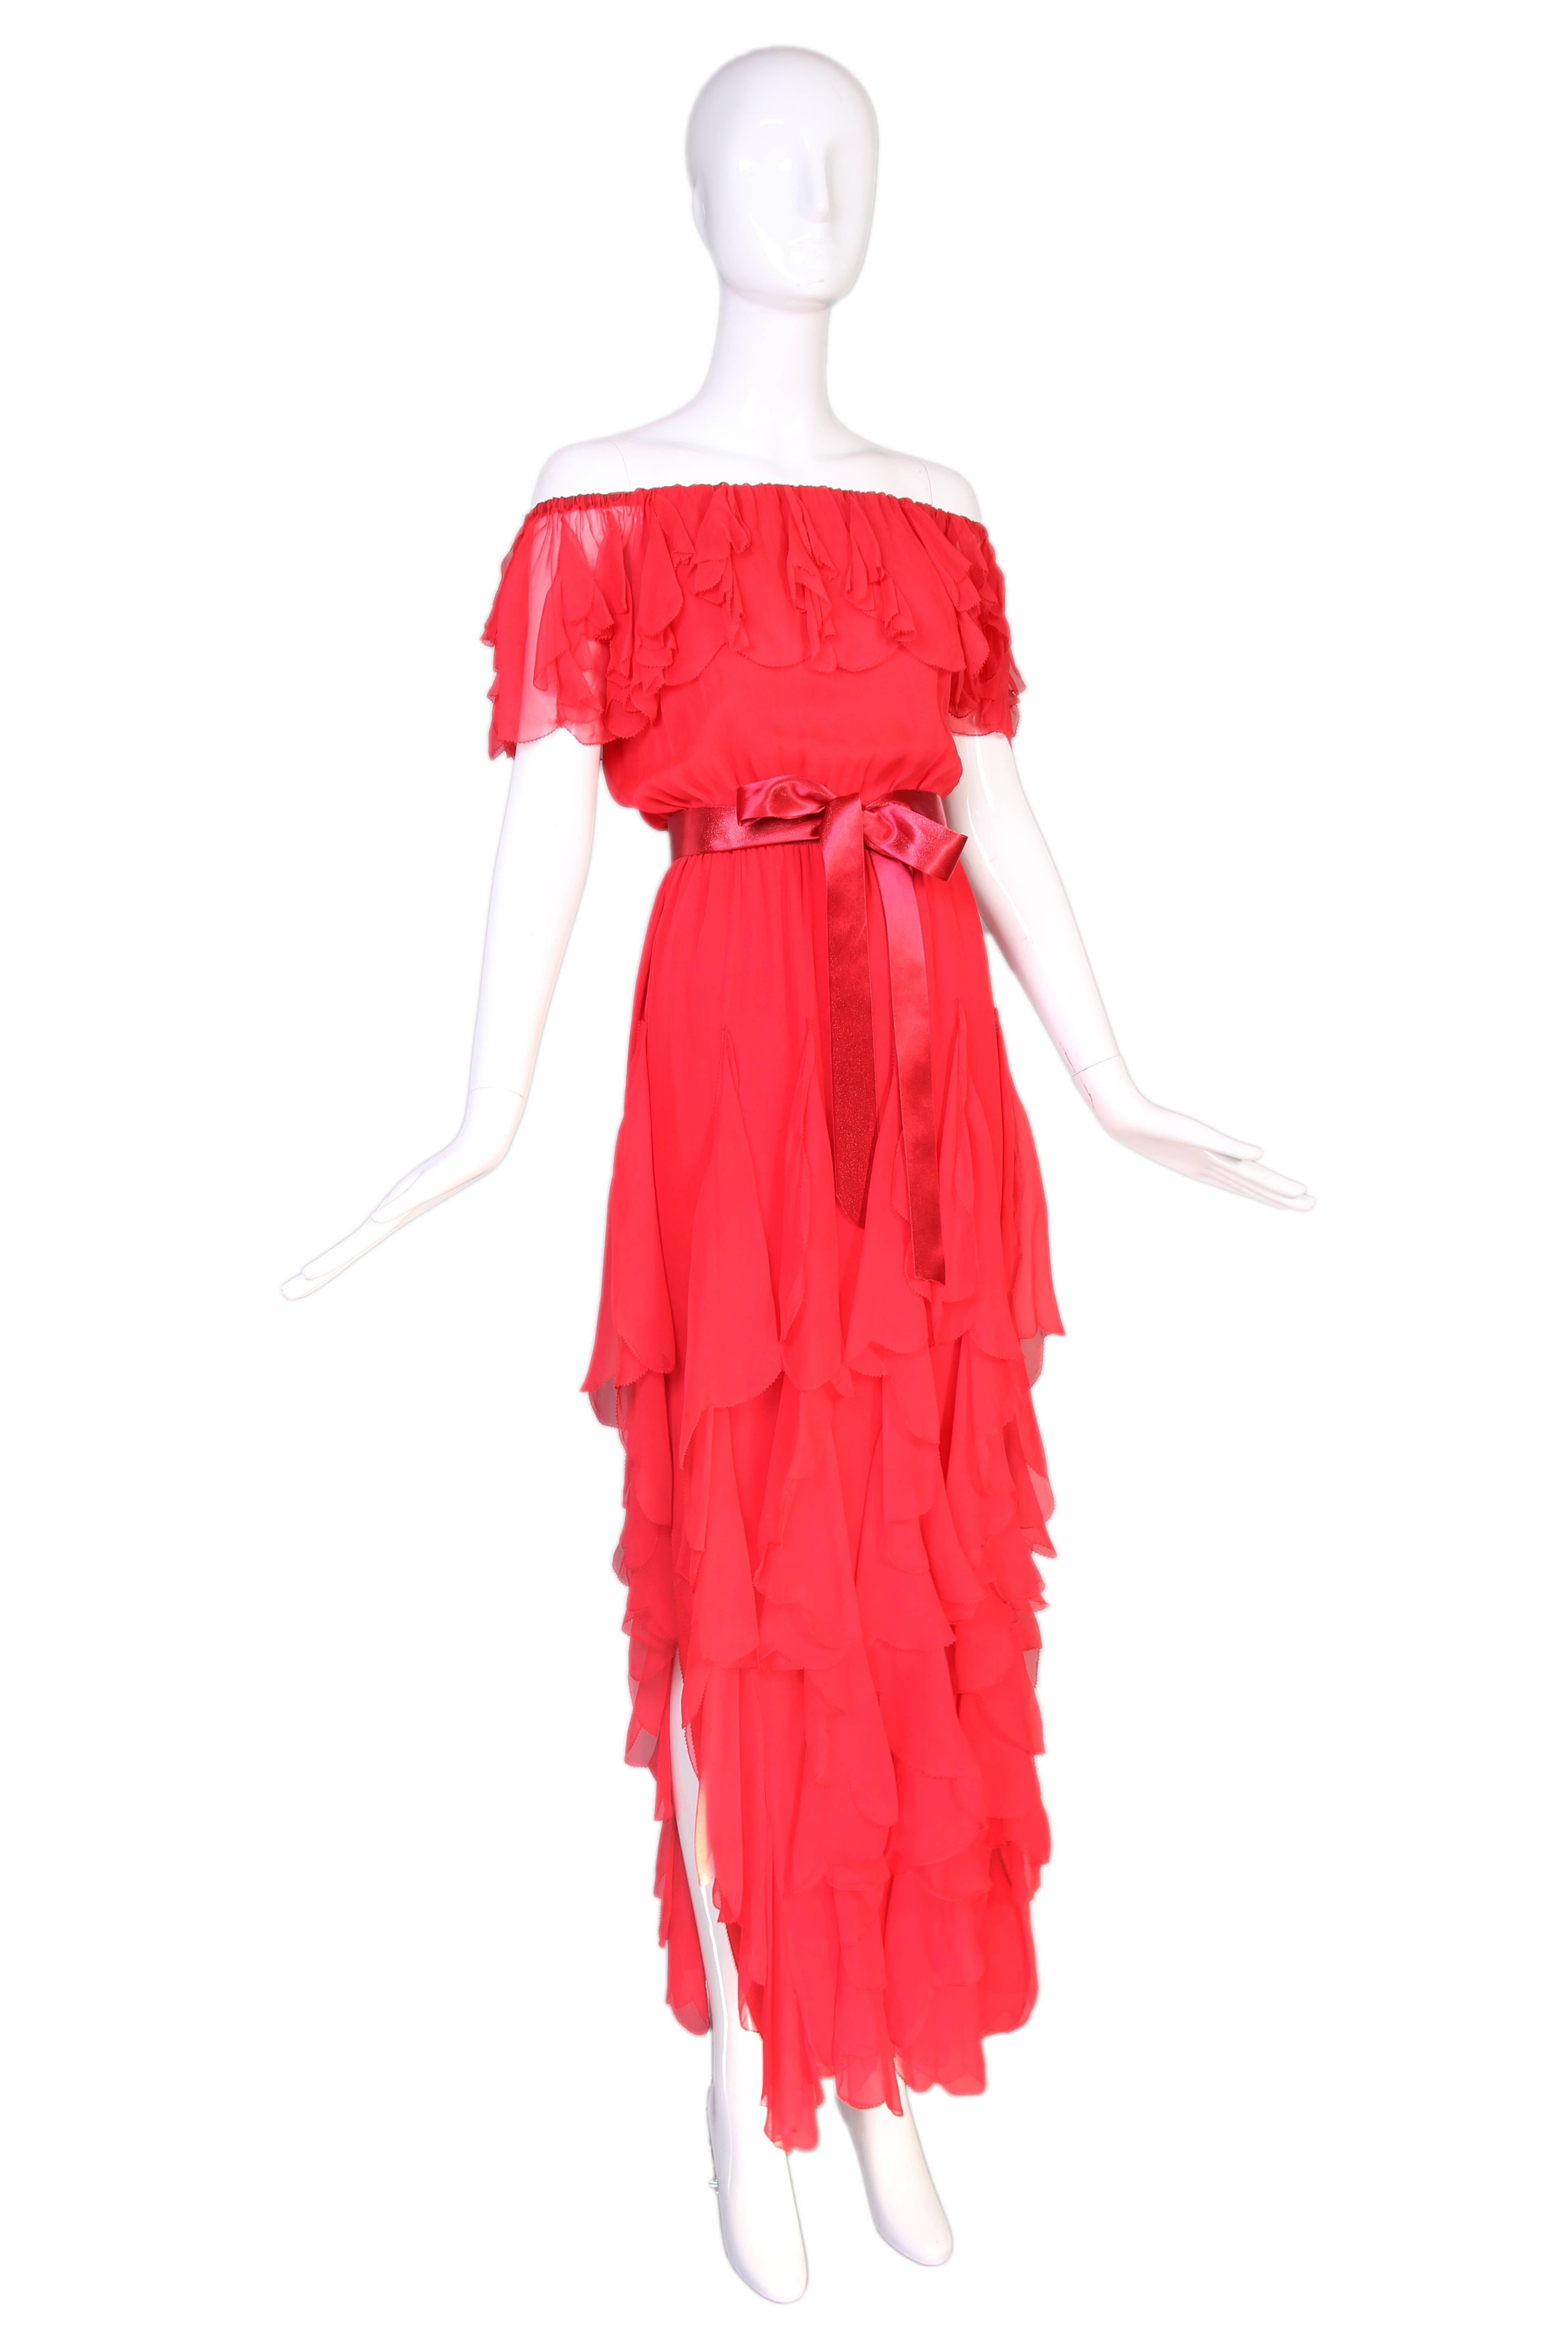 1970's Yves Saint Laurent red silk chiffon evening gown with layered scalloped ruffles at the neckline and long, vertical scallop-edged ruffles at intervals down the entire the skirt. Waist is elastic as is the neckline - which can be worn off the